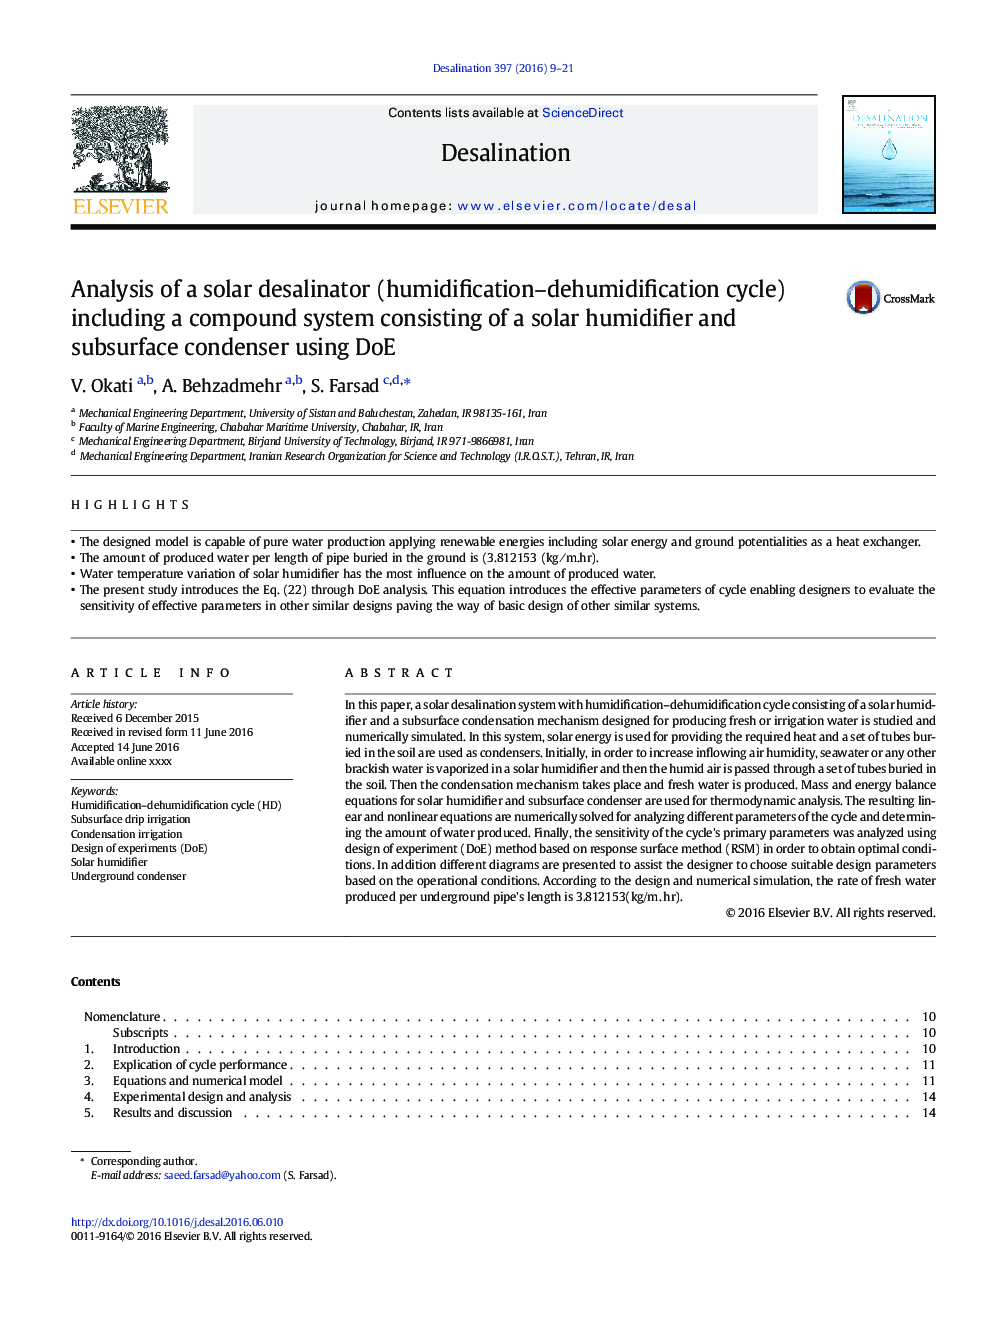 Analysis of a solar desalinator (humidification-dehumidification cycle) including a compound system consisting of a solar humidifier and subsurface condenser using DoE